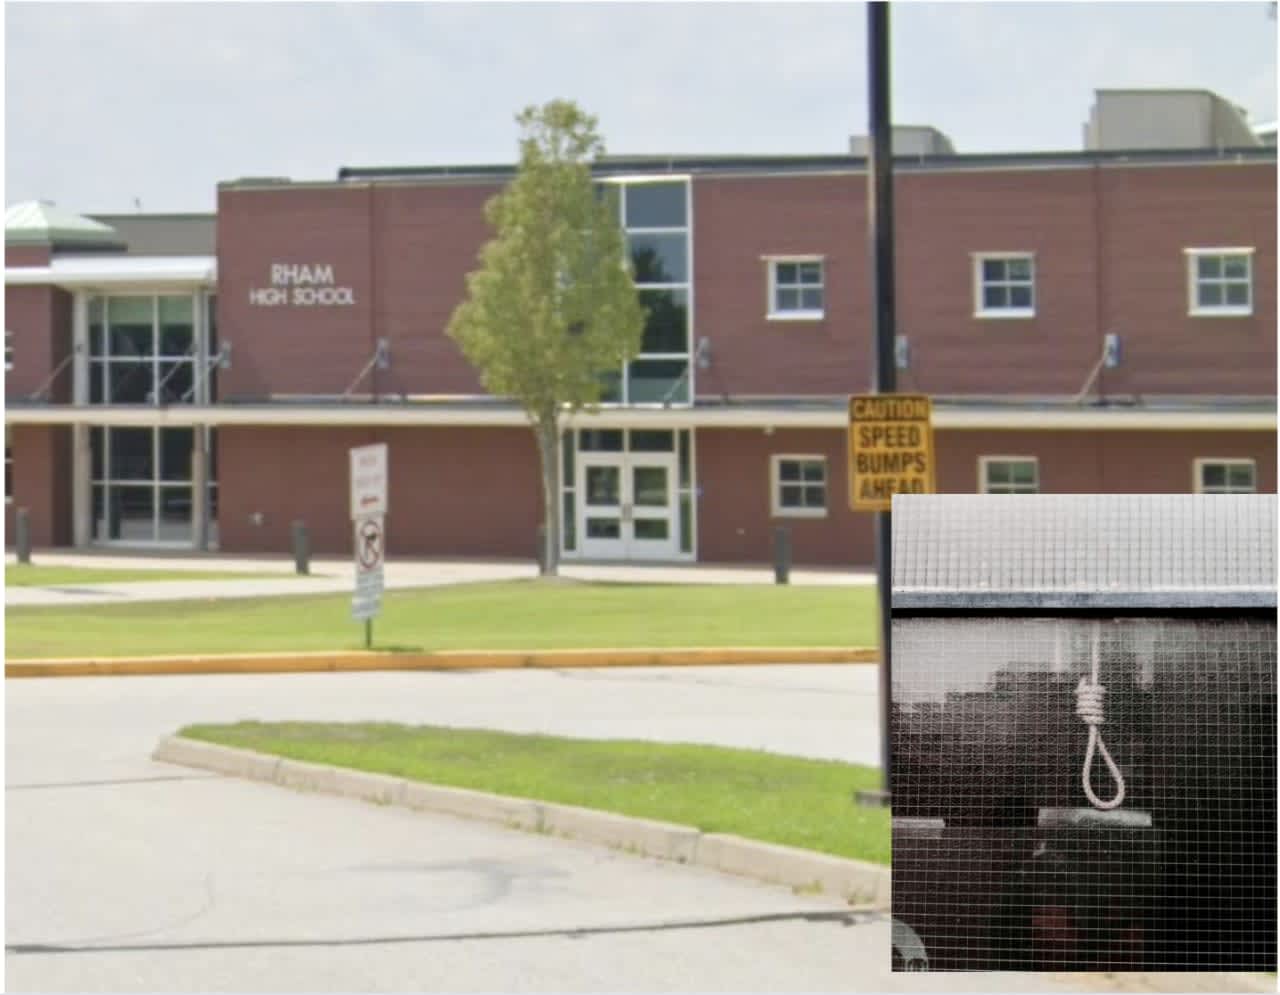 A 17-year-old has been charged in connection to an incident in which a noose was found in a boys' locker room at a high school in Connecticut.